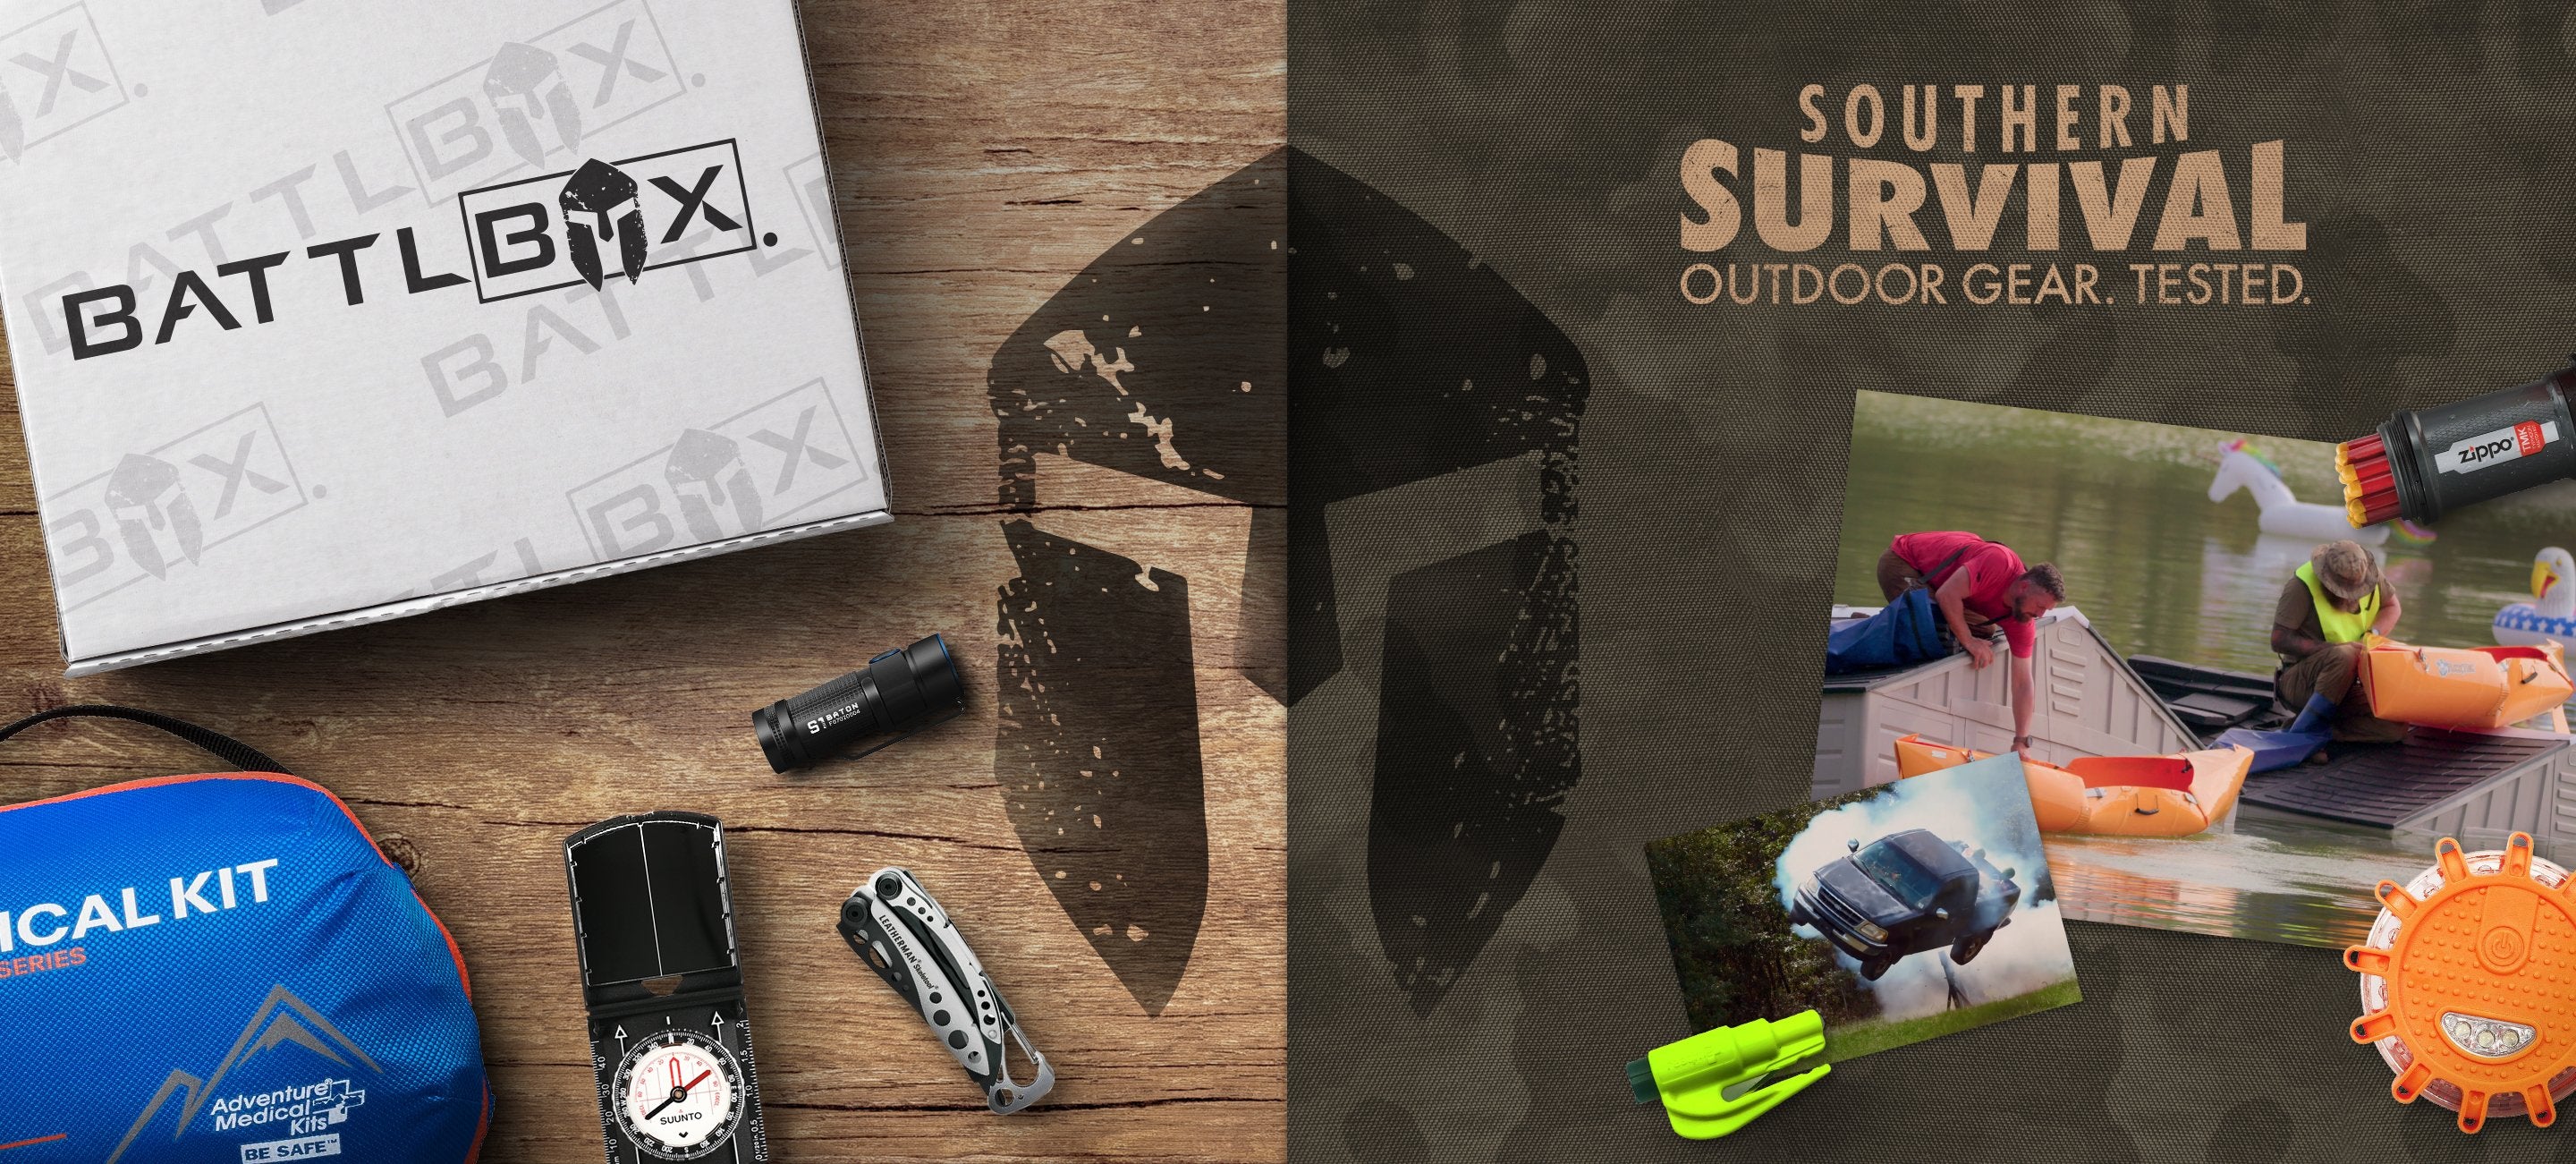 BattlBox - Survival Gear and Outdoor Gear Delivered Monthly